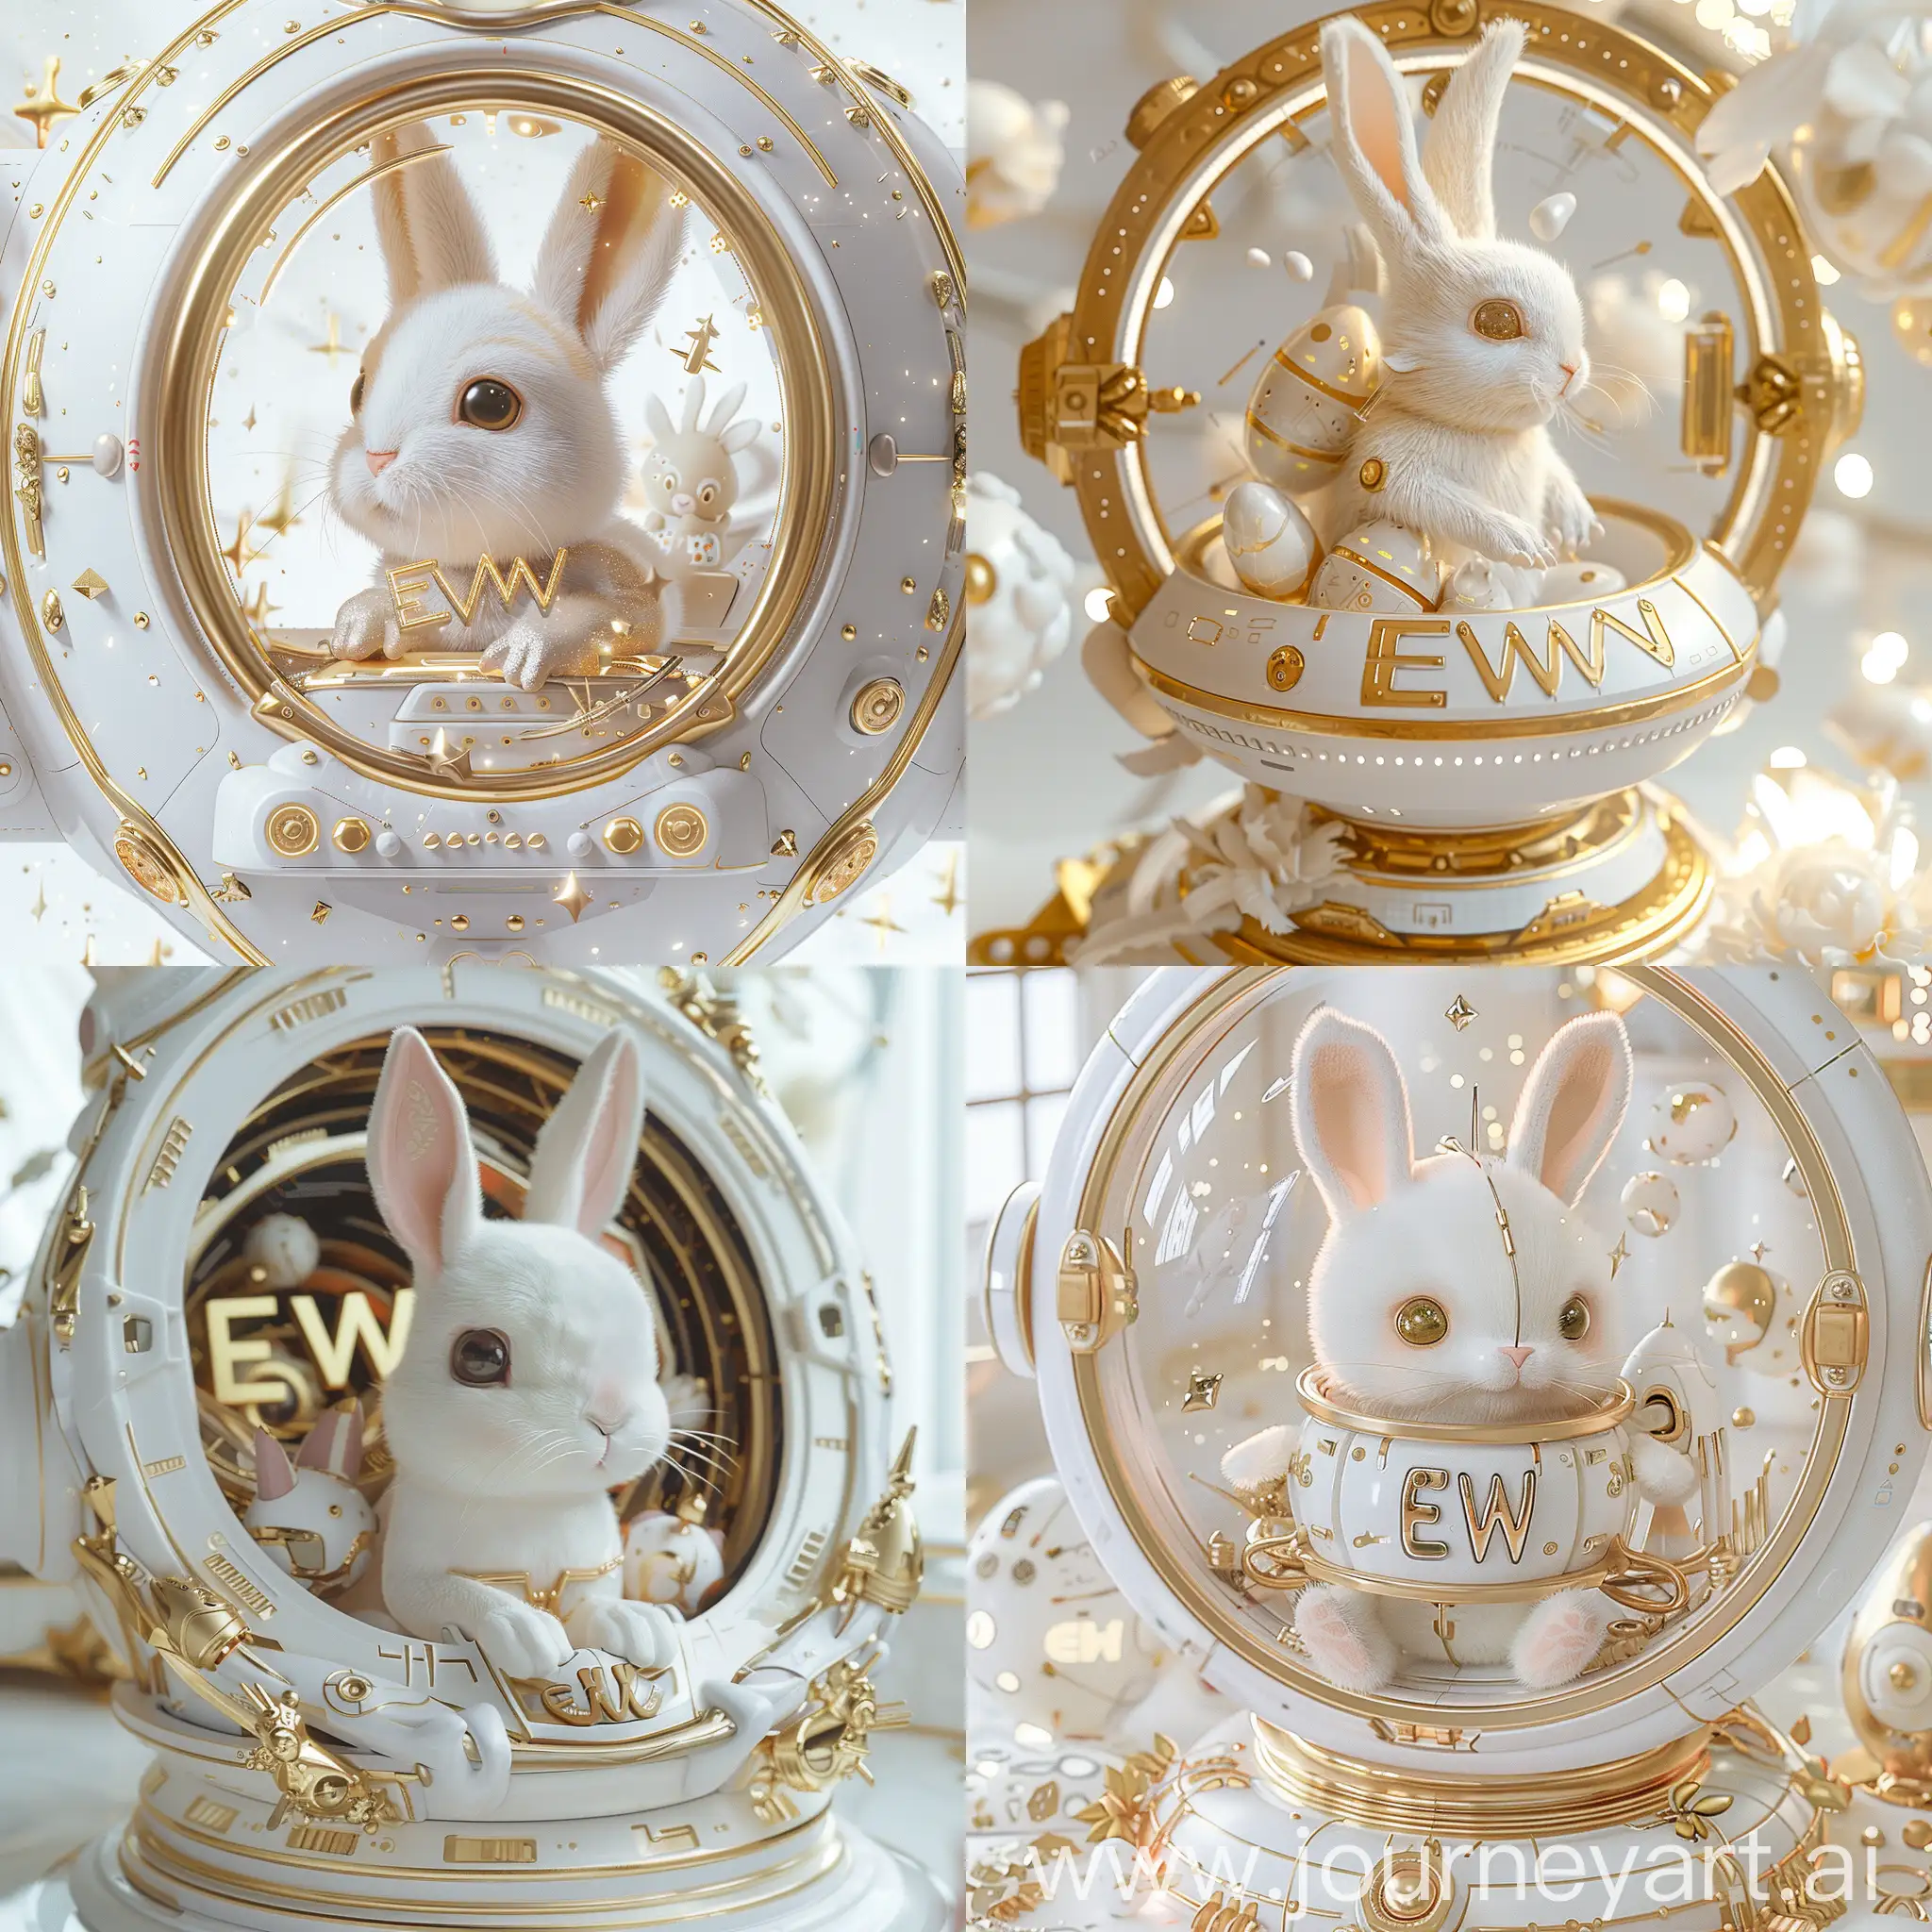 a cute Easter Bunny from the Future with the insription "EWW"  in a spaceship,  ultra realistic, bohemian fashion, high detail, sharp focus, white and gold
